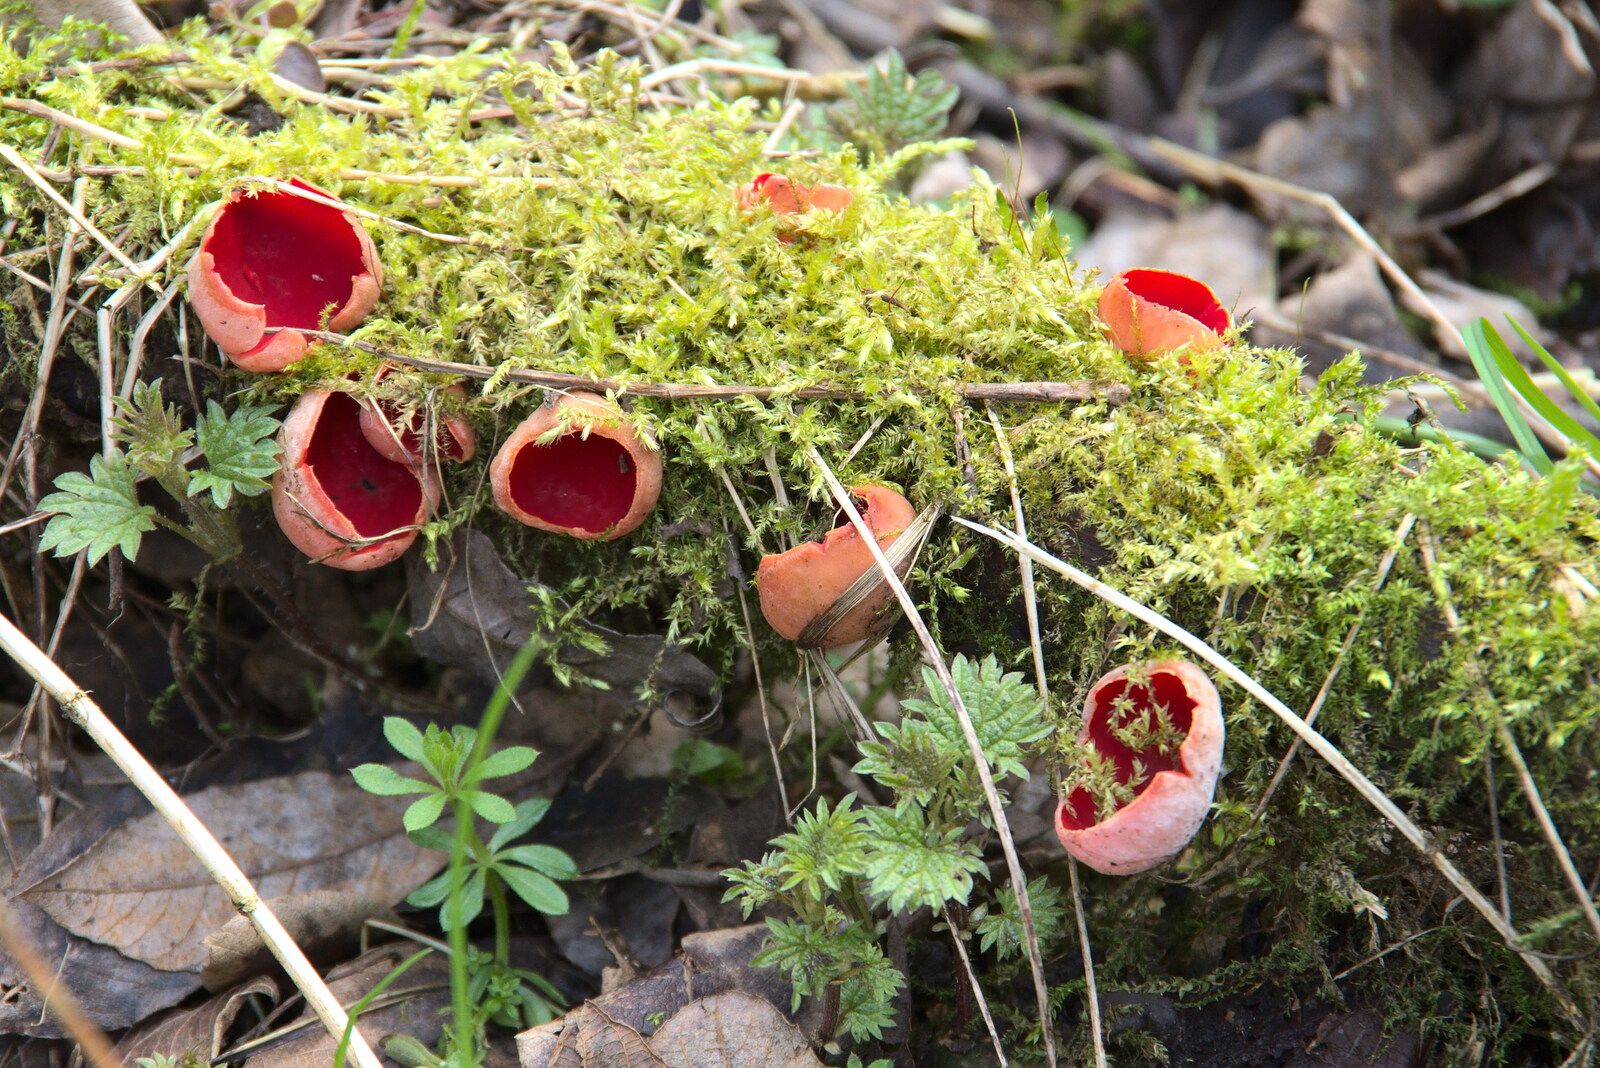 The Elf Cup mushrooms are everywhere along the path from Another Walk on Eye Airfield, Eye, Suffolk - 14th March 2021